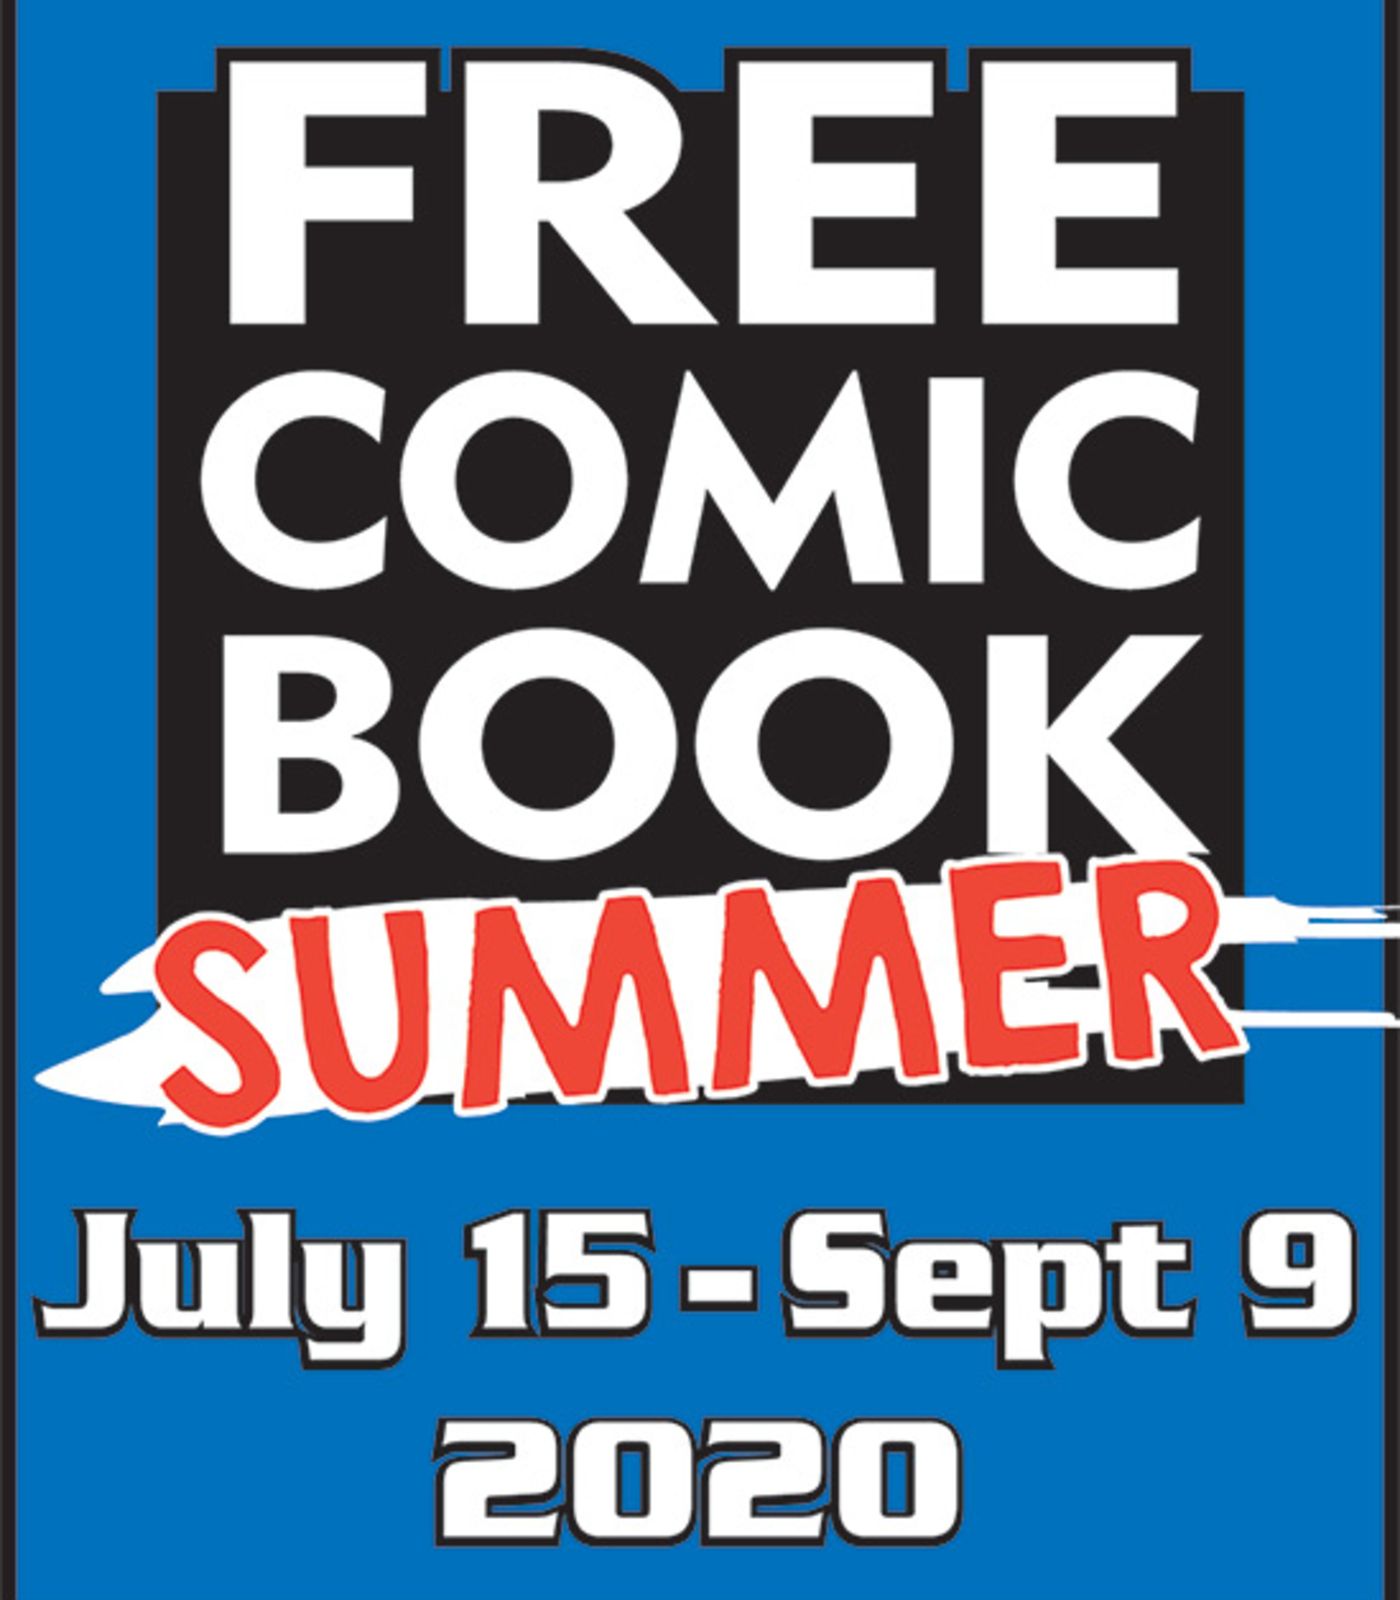 Free Comic Book Day Is Now Free Comic Book SUMMER